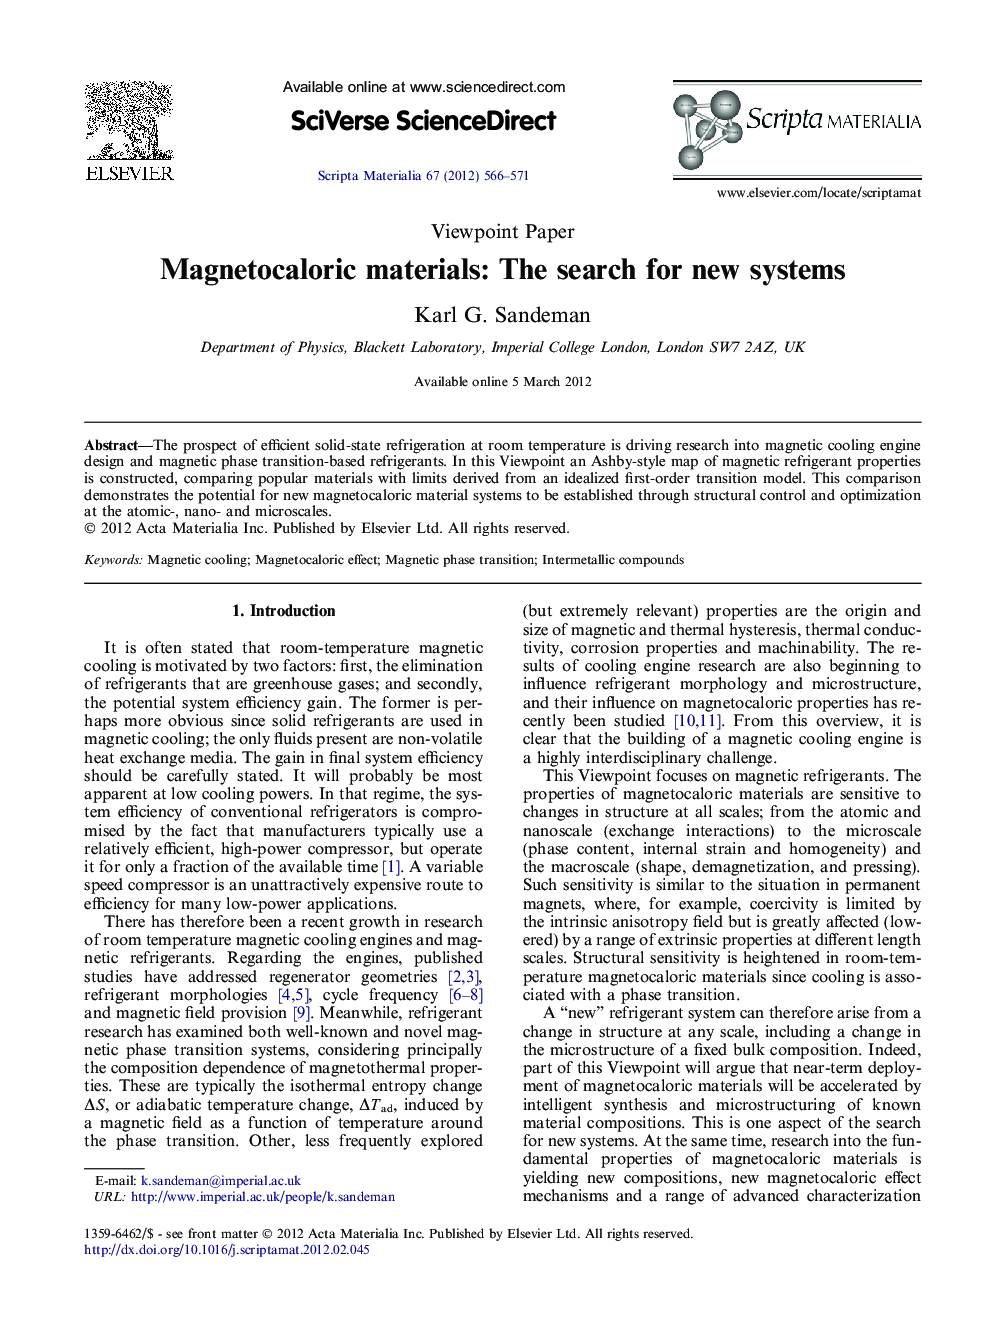 Magnetocaloric materials: The search for new systems